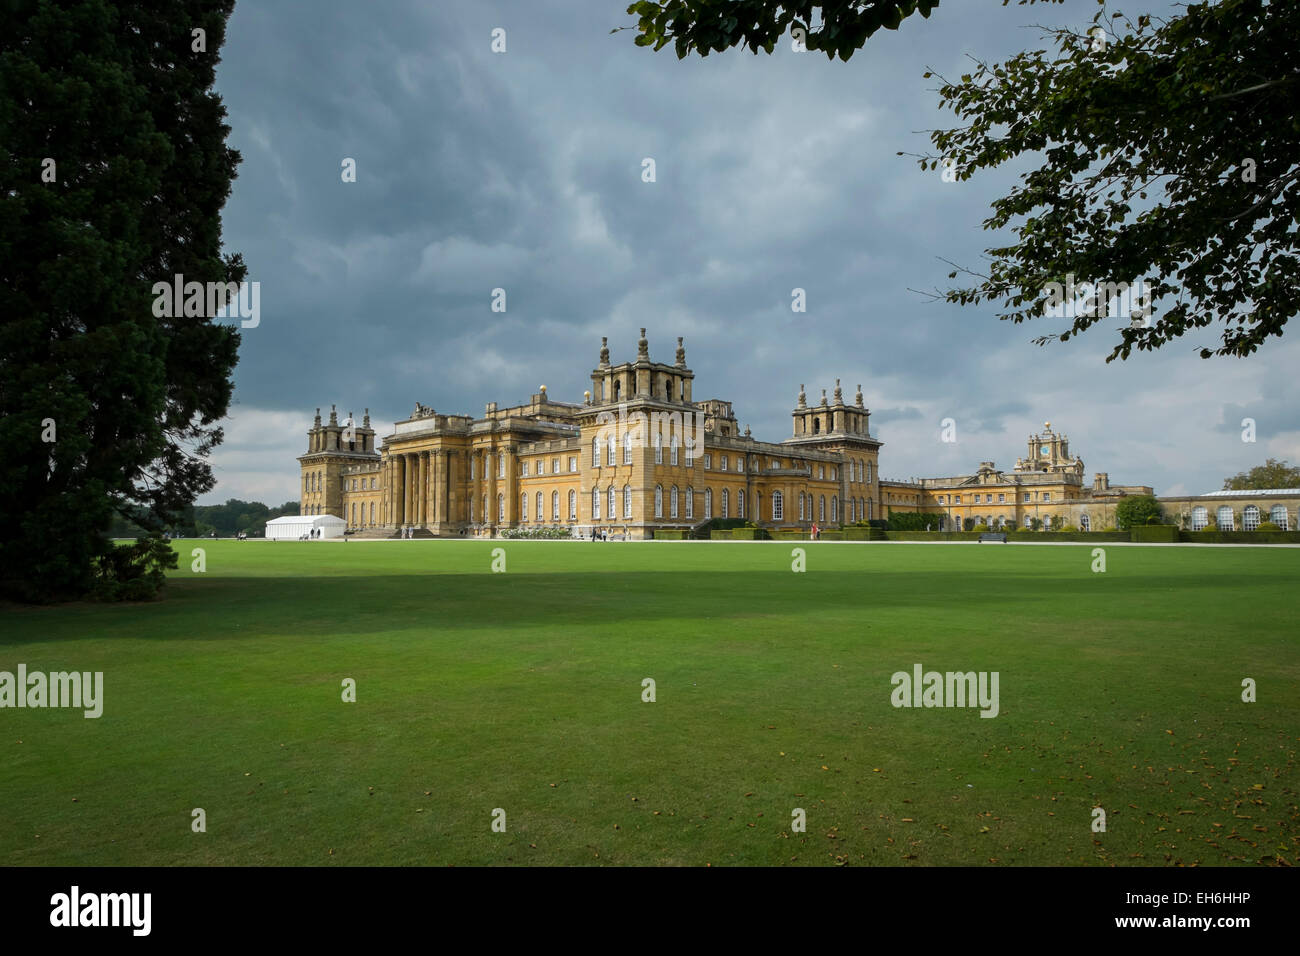 Woodstock, Oxfordshire: The magnificient Blenheim Palace Stock Photo